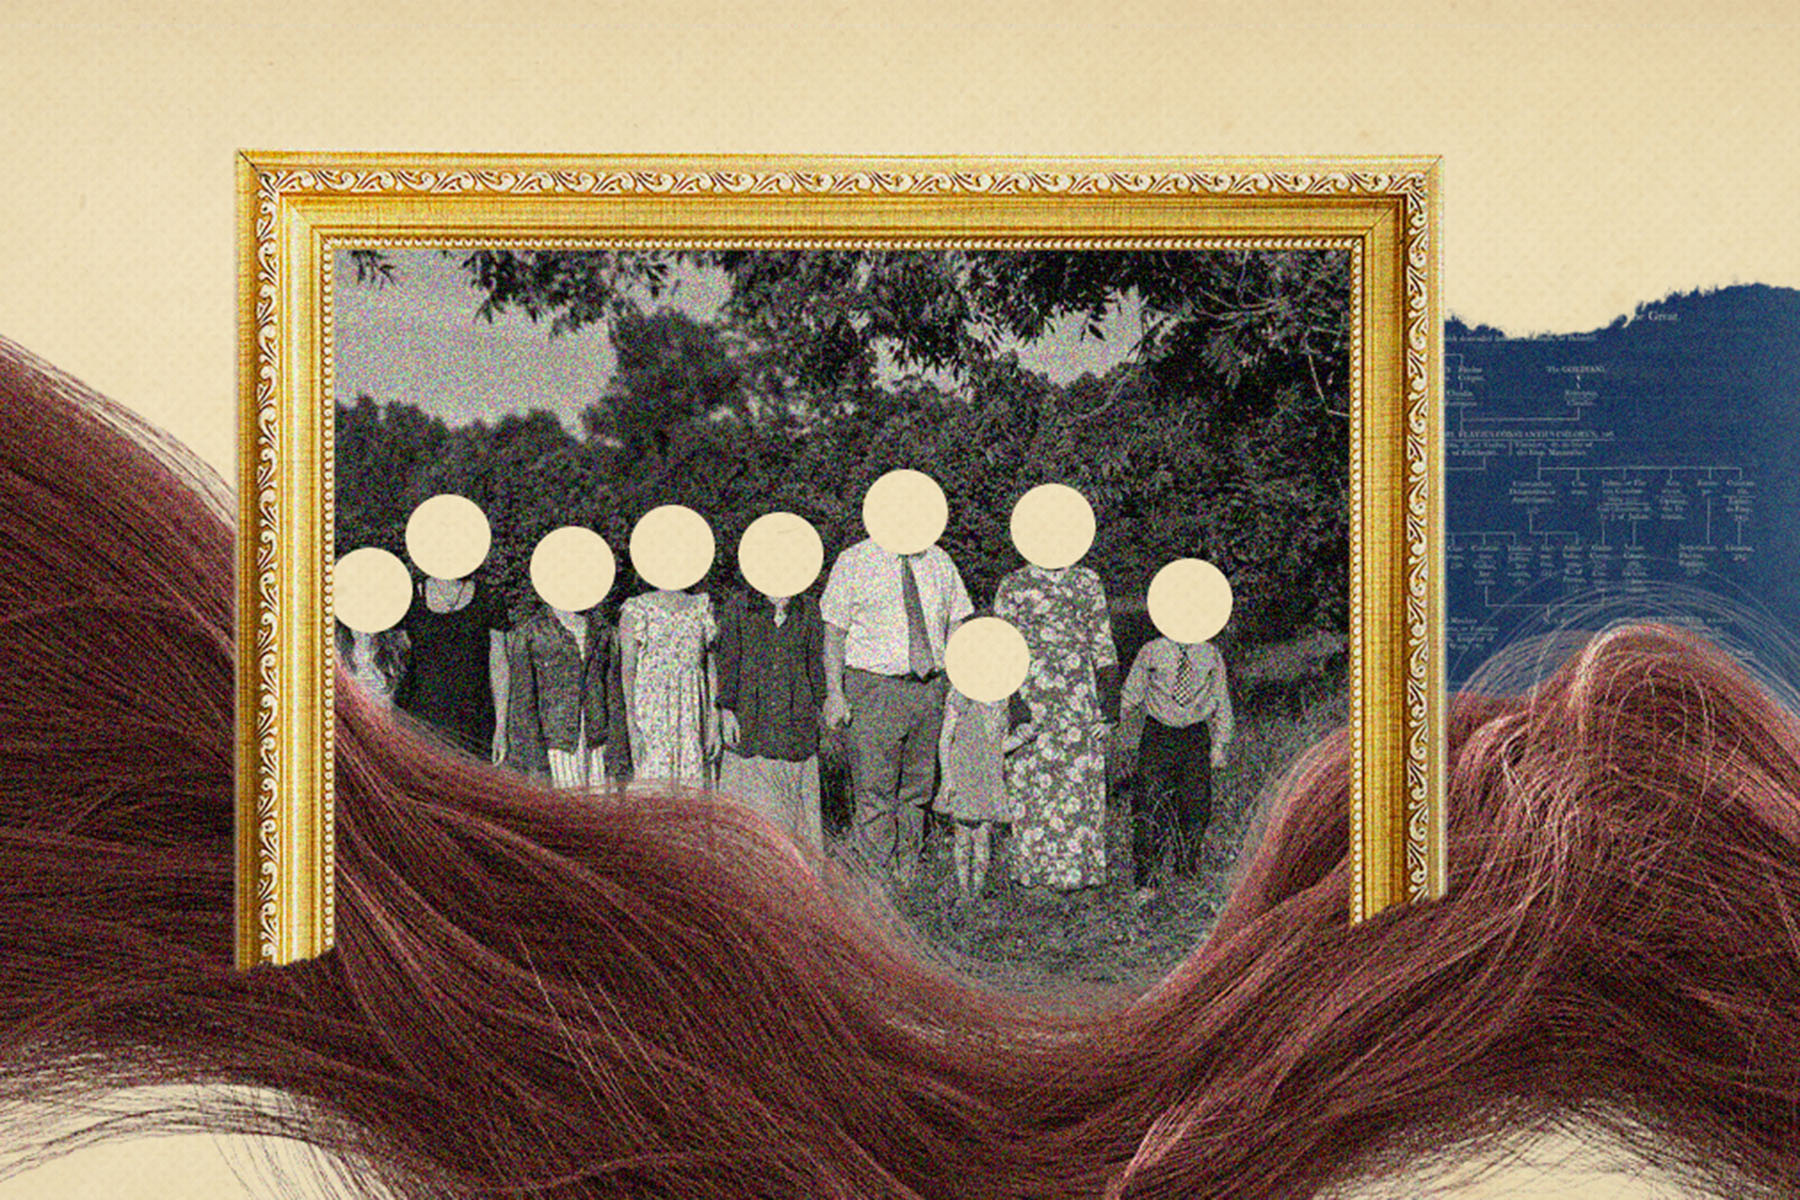 A photo illustration depicts a family portraits where faces have been obscured by circles. The gold frame in which the portrait sits is surrounded by a long lock of hair. Behind the portrait, a ripped page depicts a family tree.